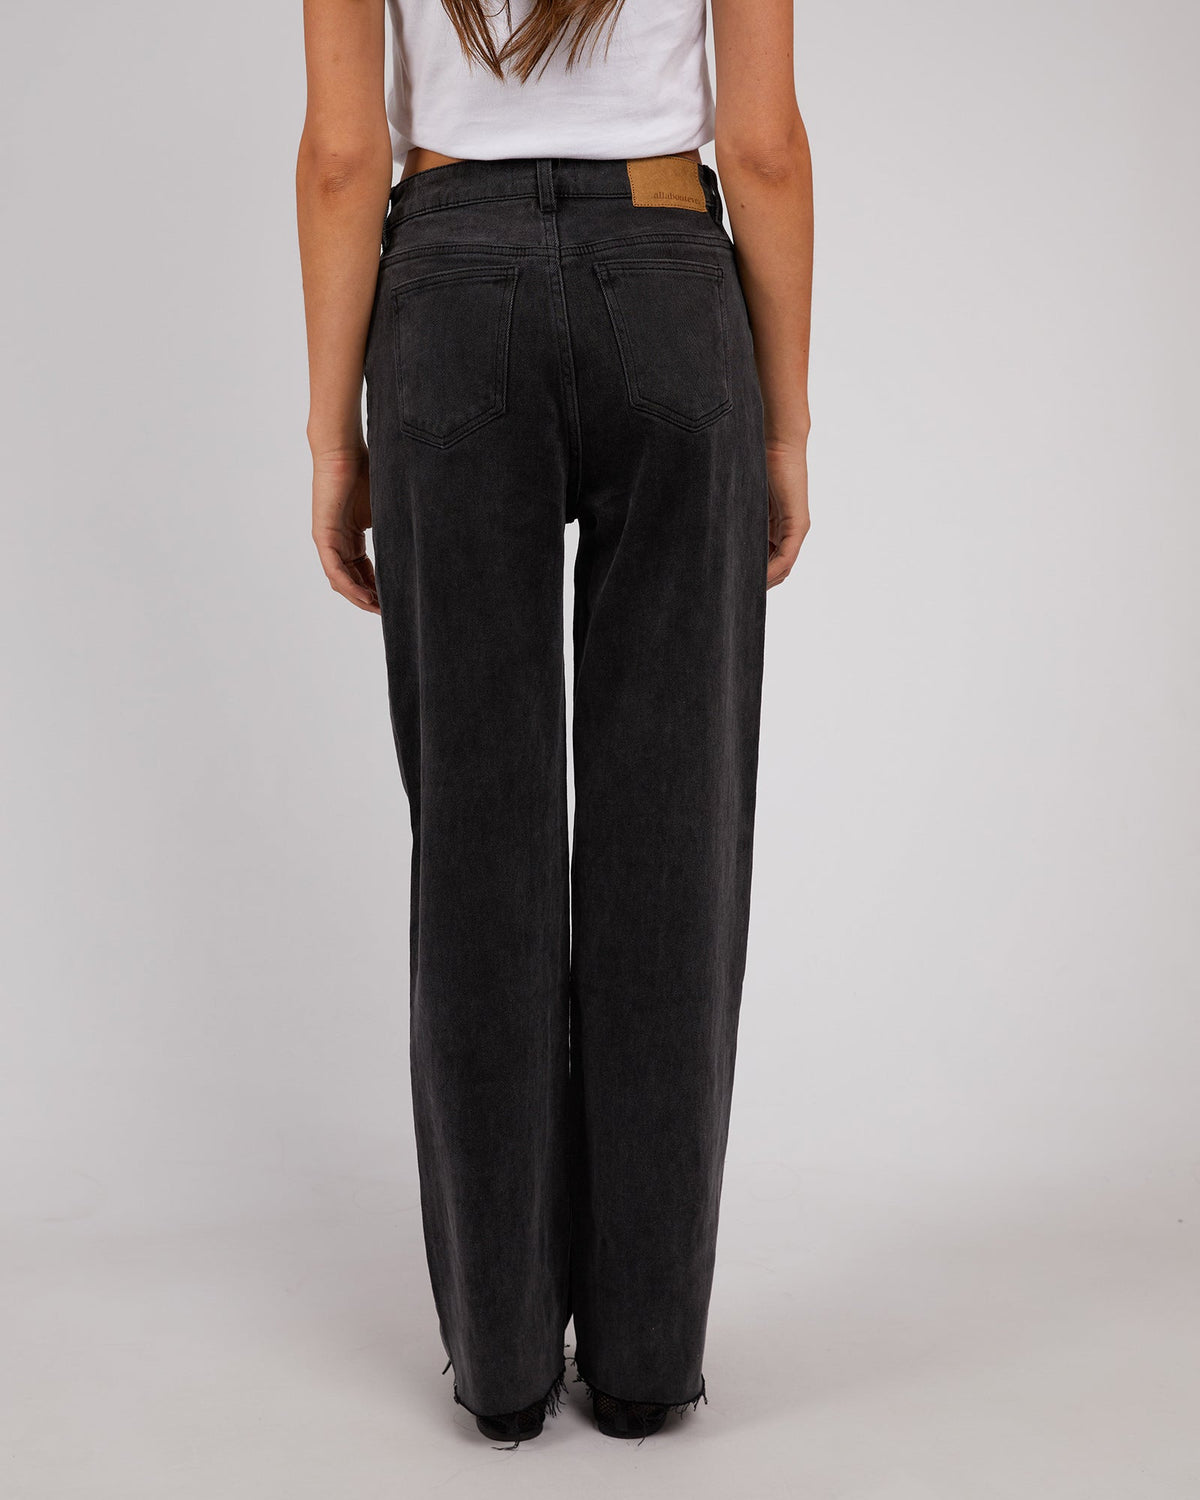 All About Eve-Skye Comfort Jean Washed Black-Edge Clothing